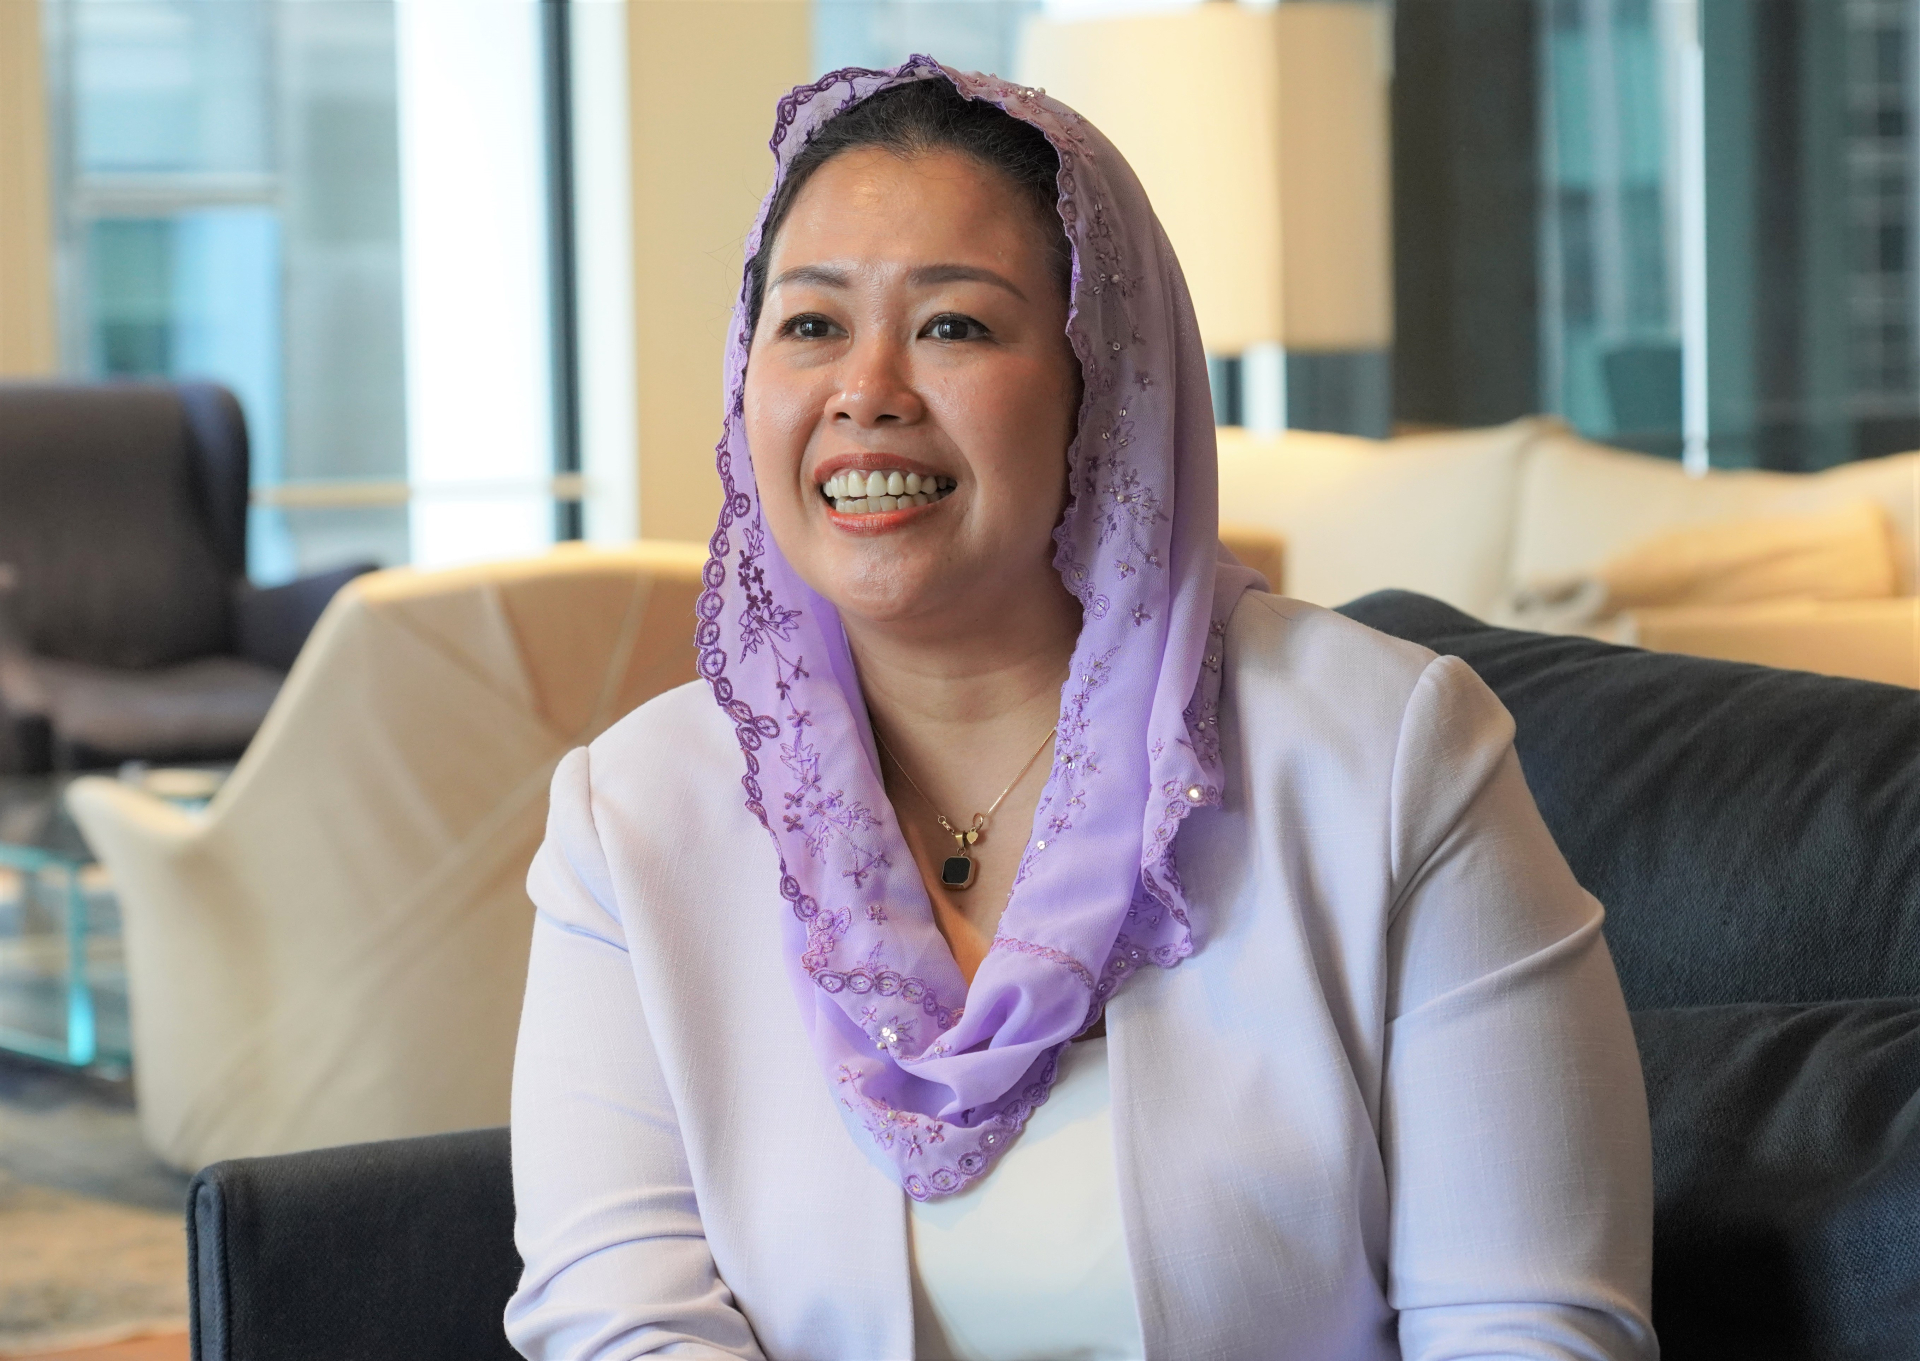 Yenny Wahid, Director of the Wahid Foundation